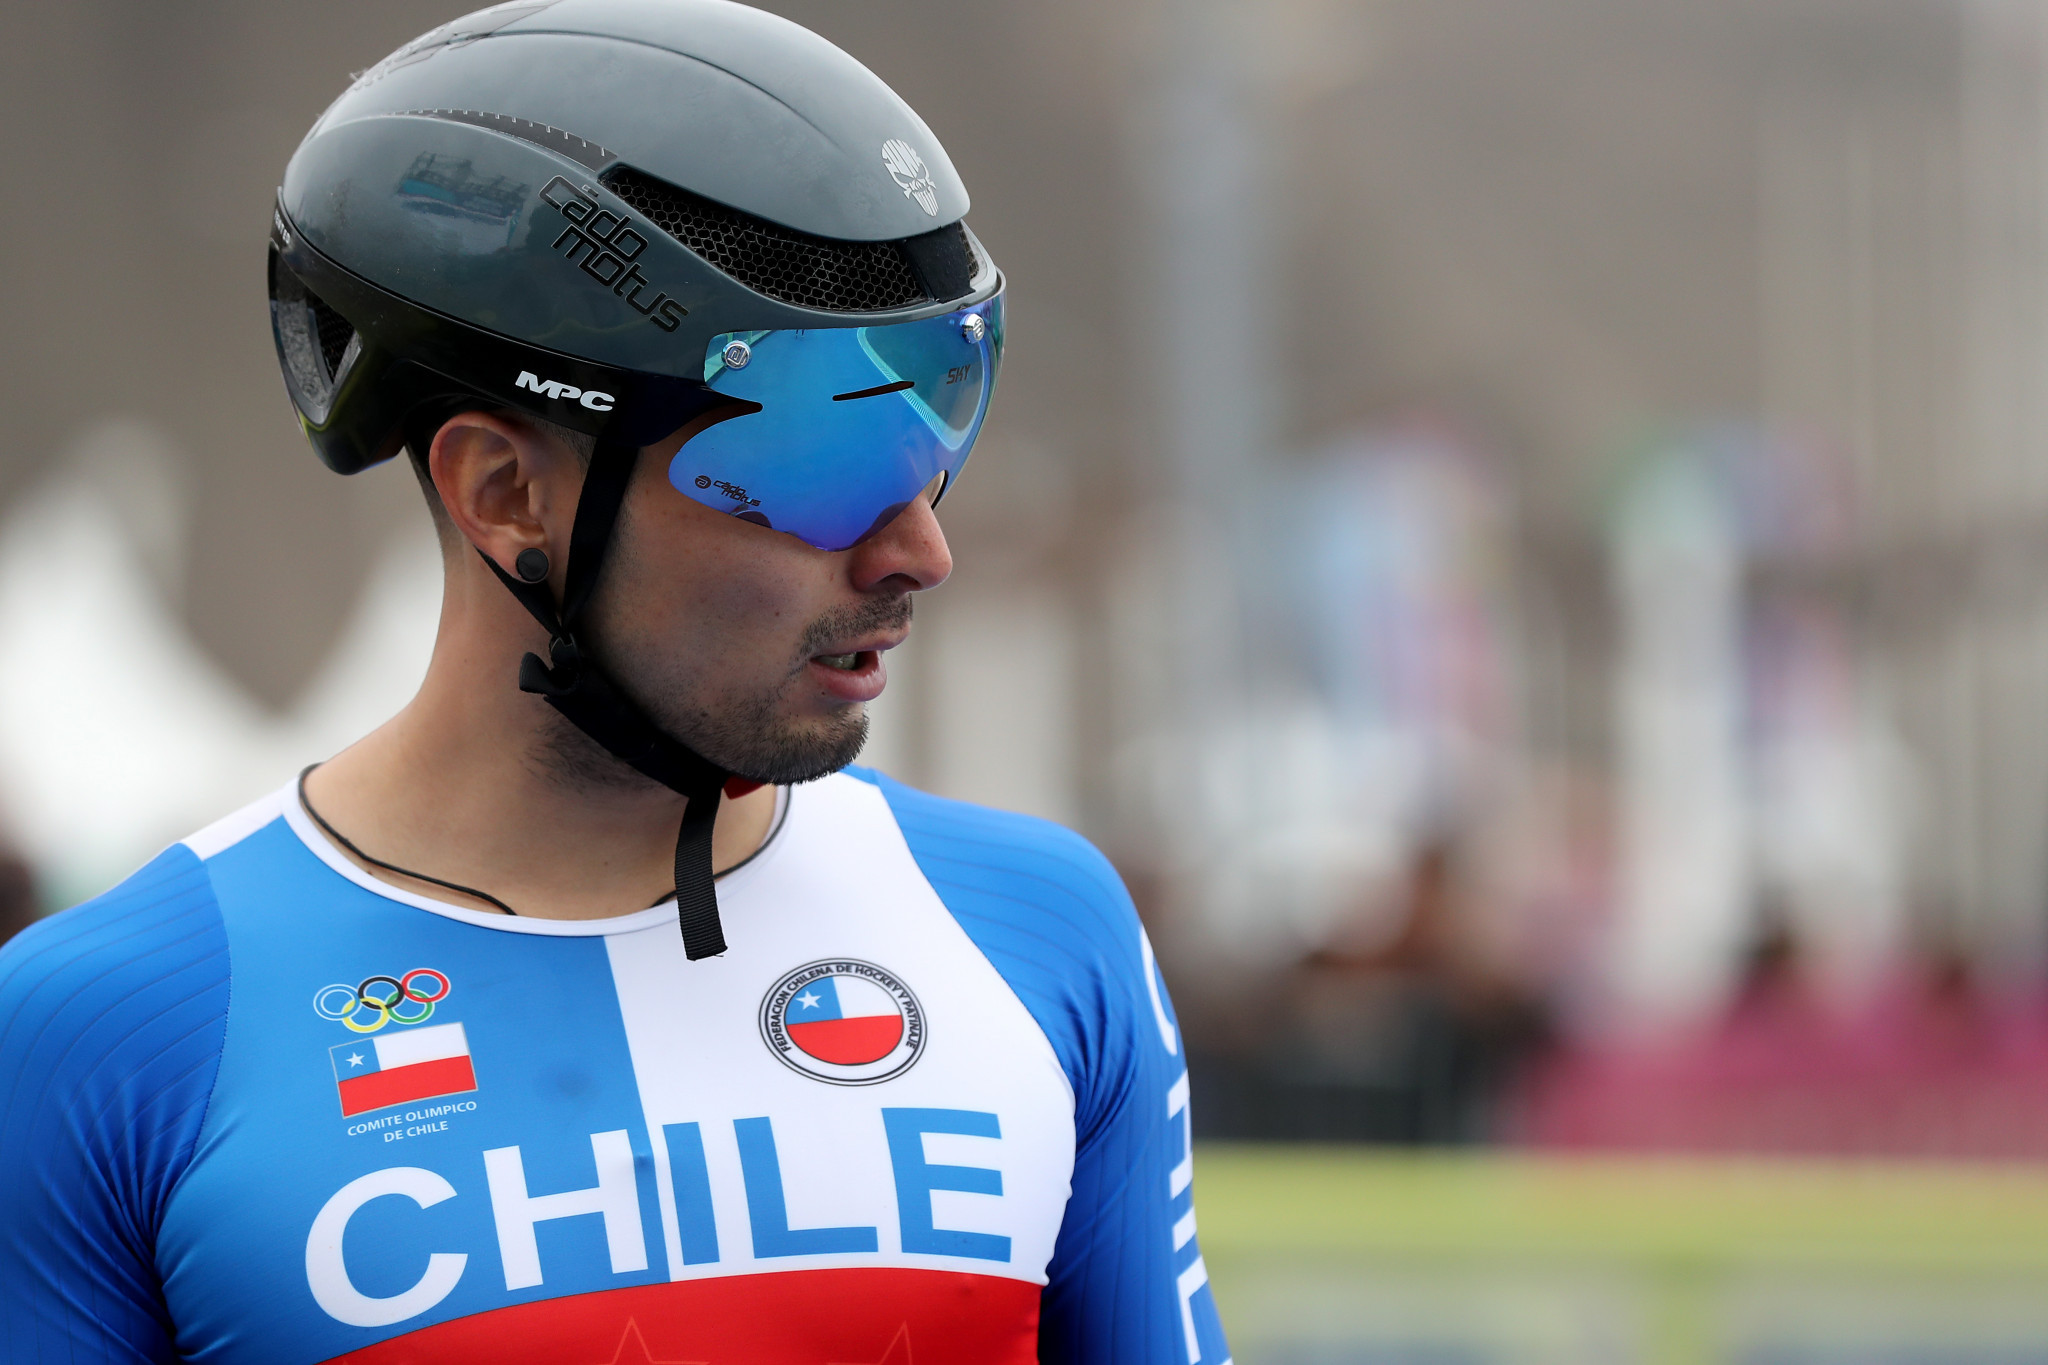 Chilean skater Silva wins first gold medal of South American Games